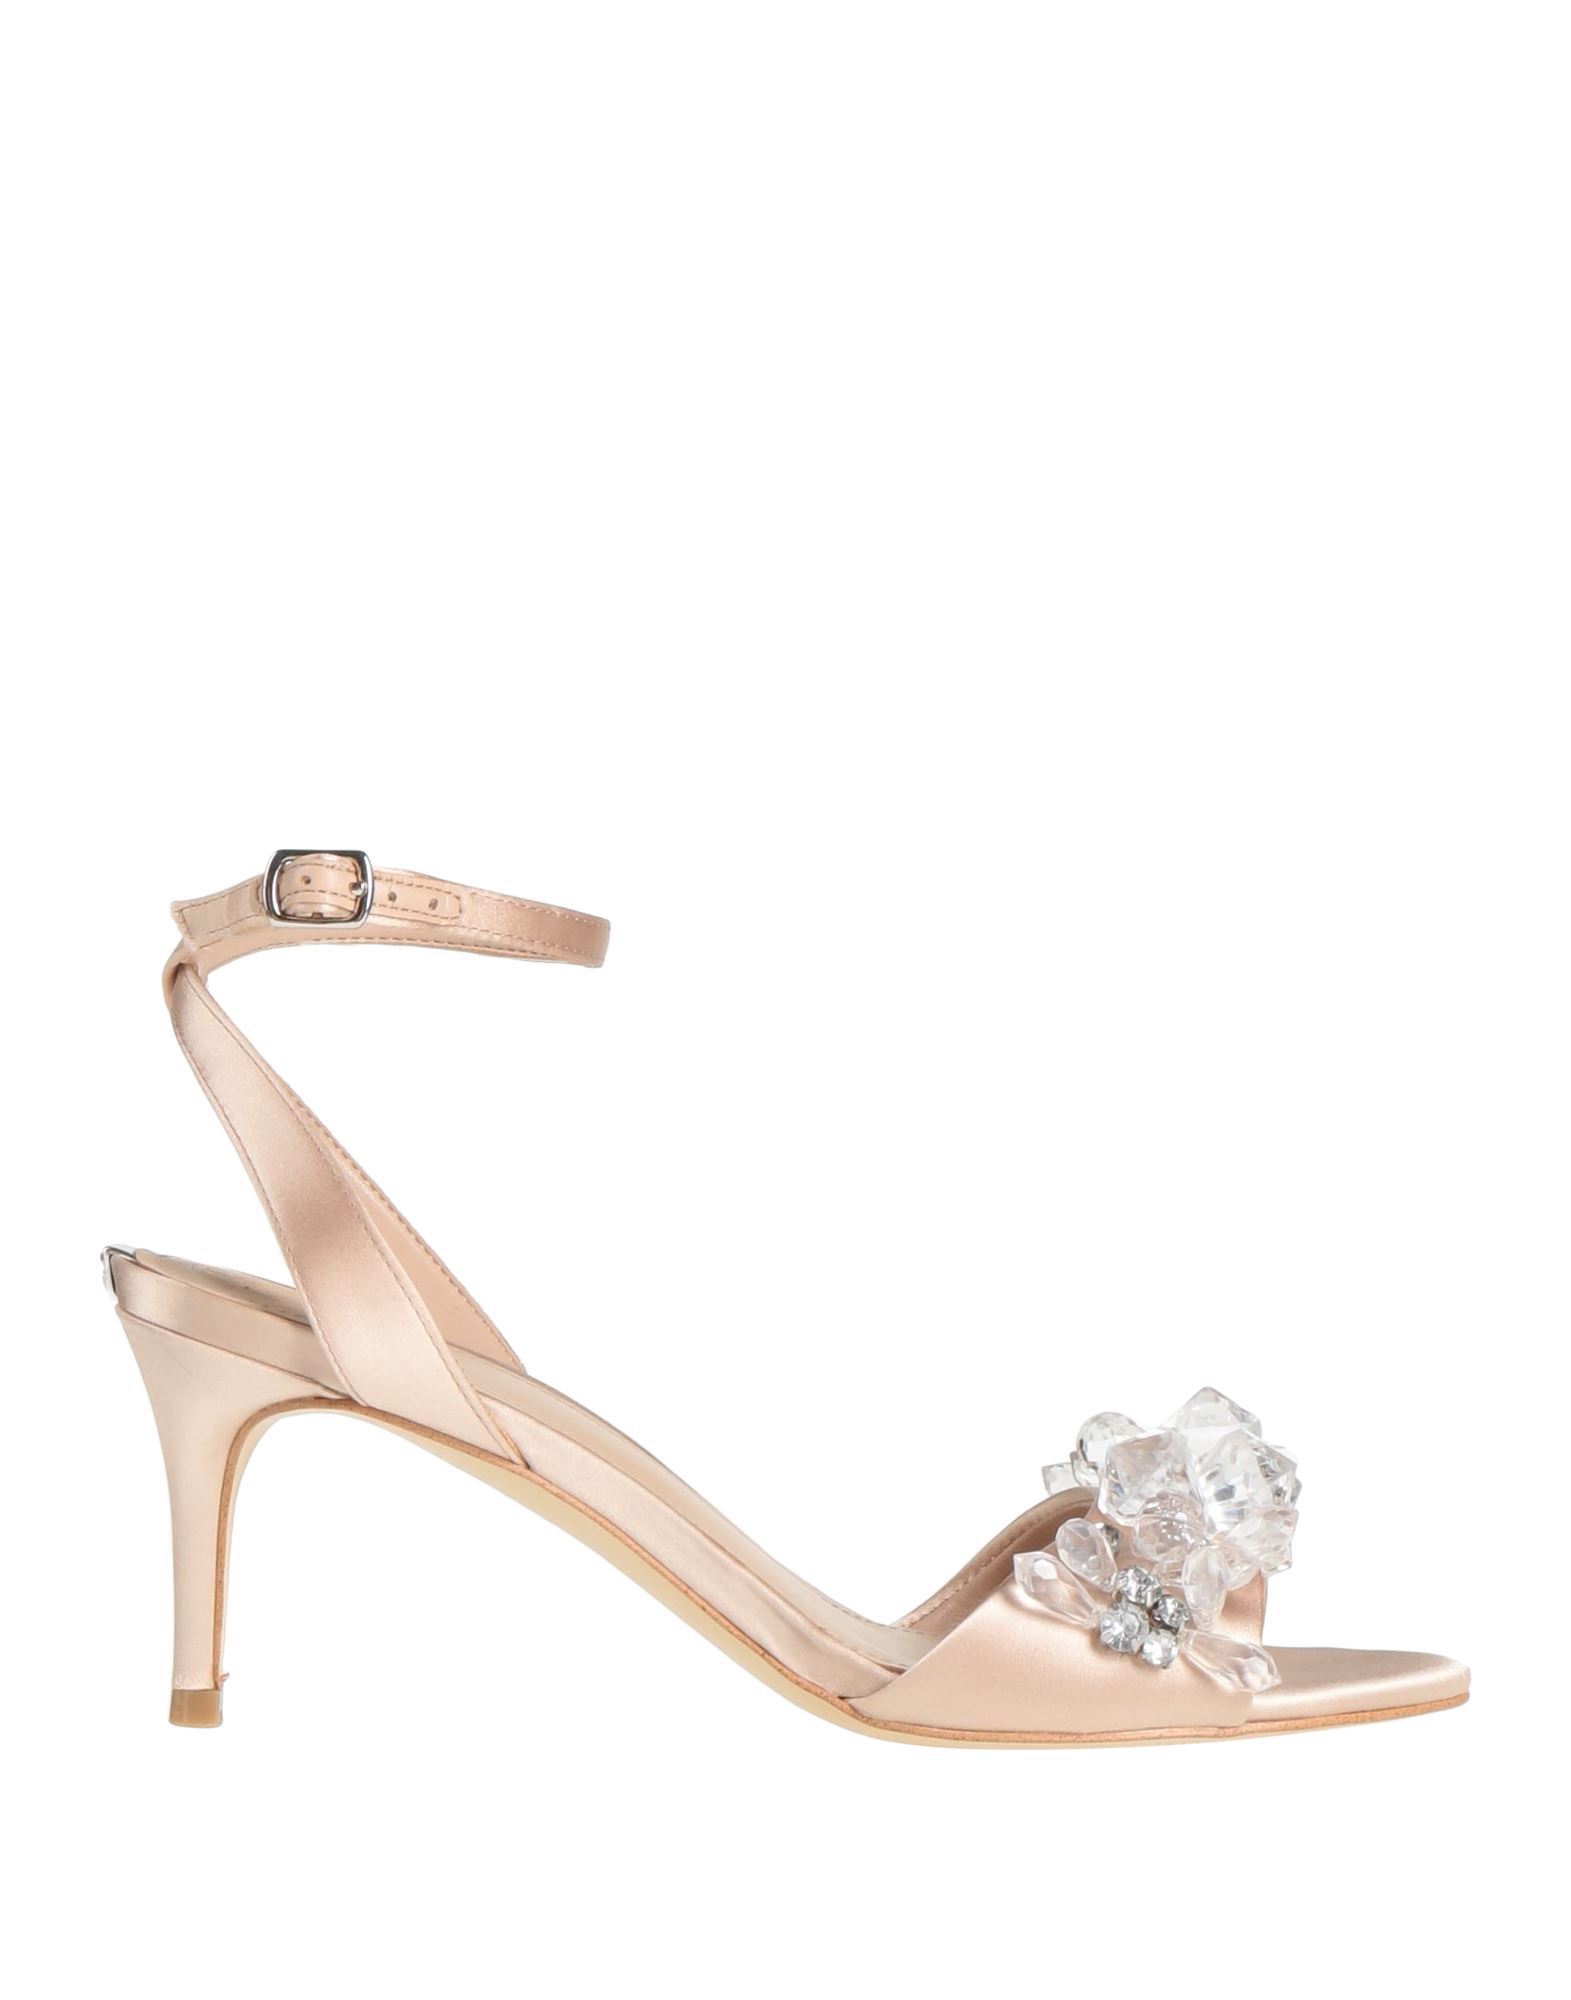 Guess Sandals In Blush